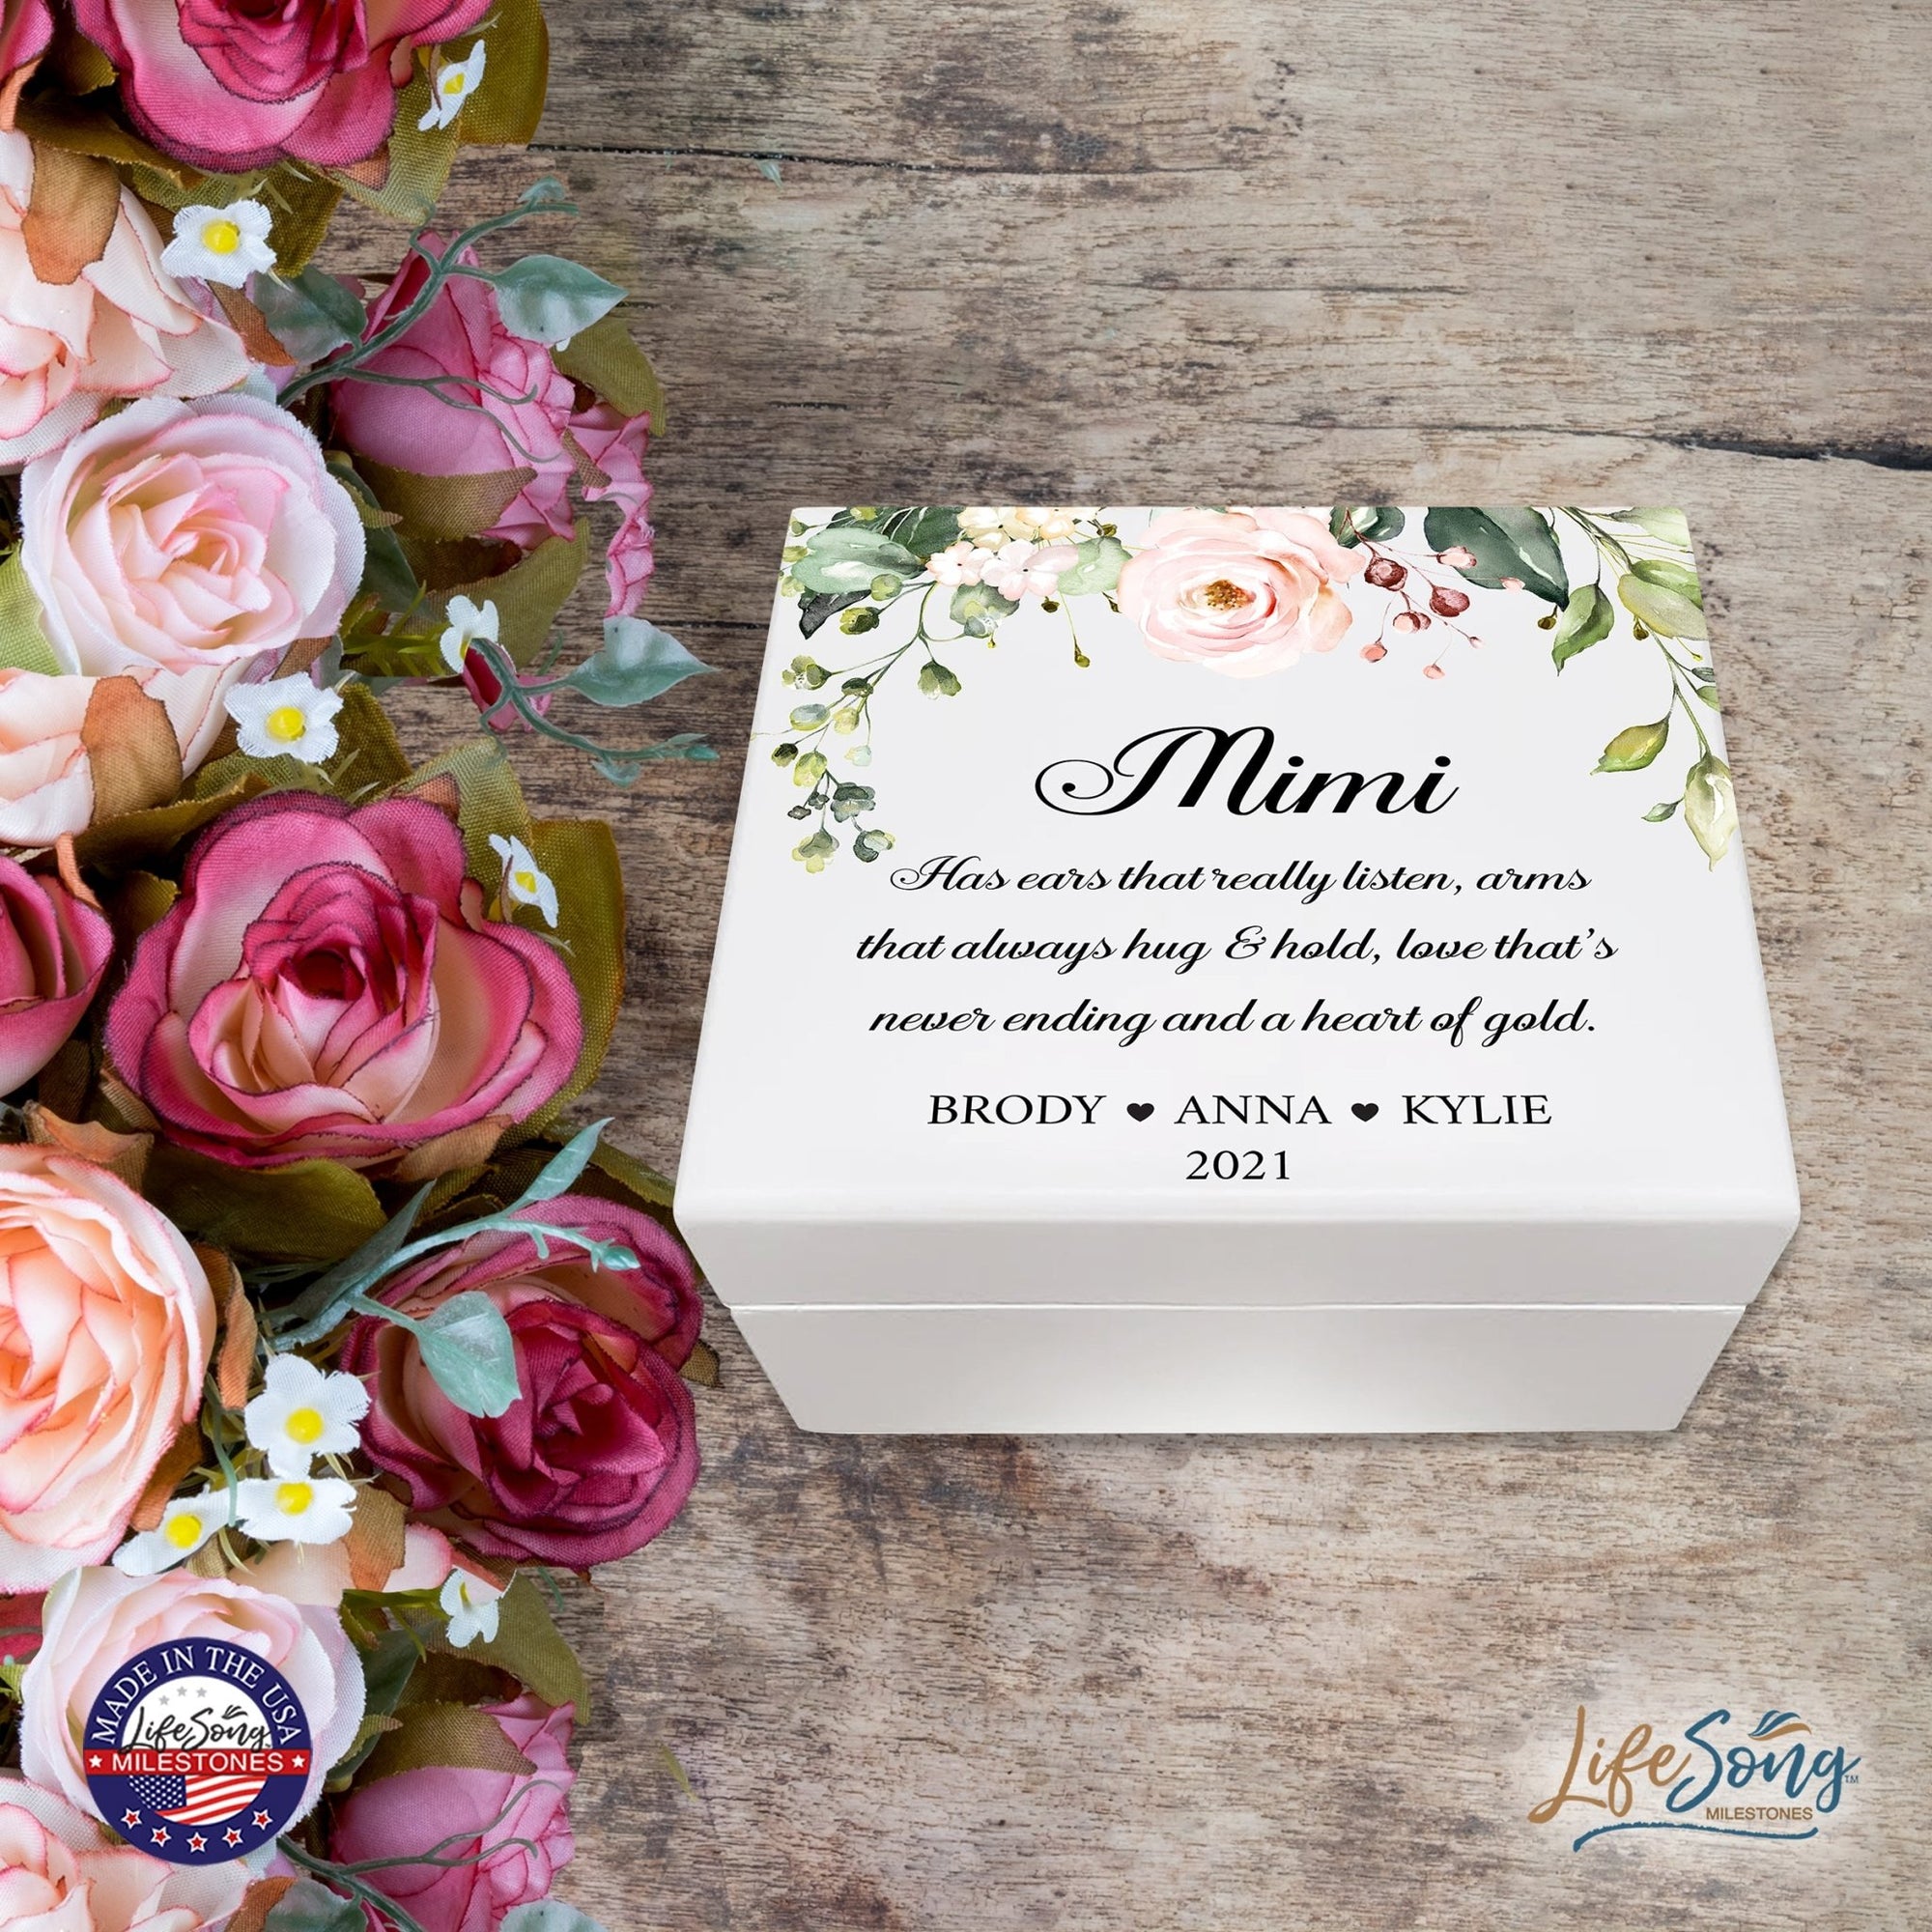 Personalized Mimi’s White Keepsake Box 6x5.5in with Inspirational verse - A Heart Of Gold - LifeSong Milestones